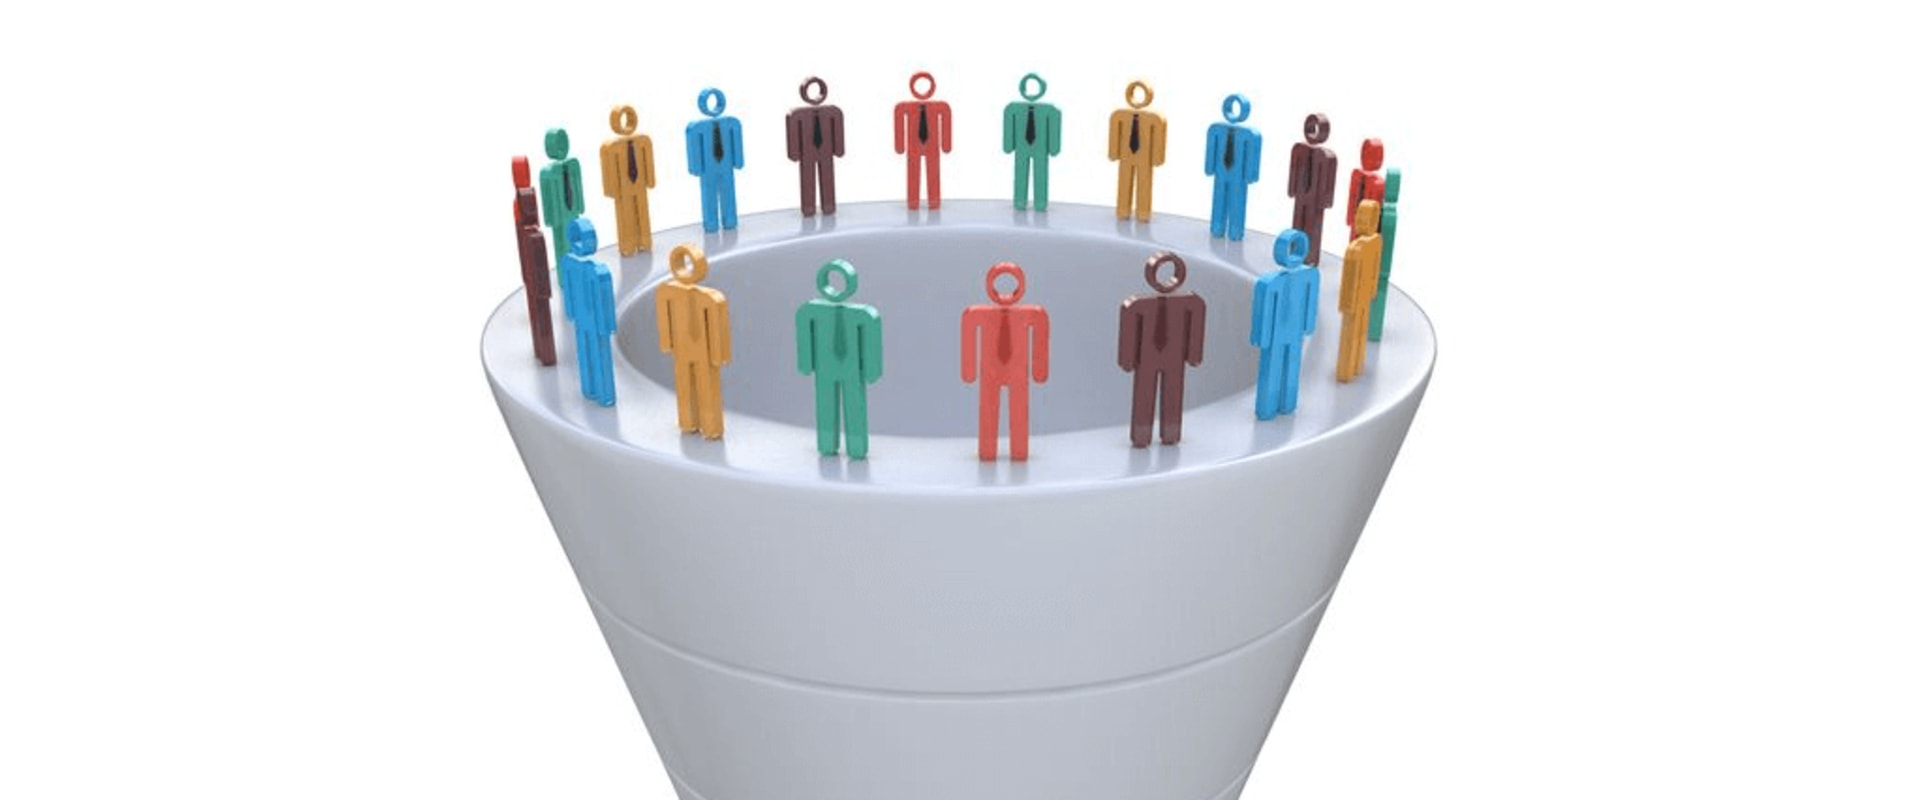 Do You Need a Sales Funnel to Succeed in Digital Marketing?